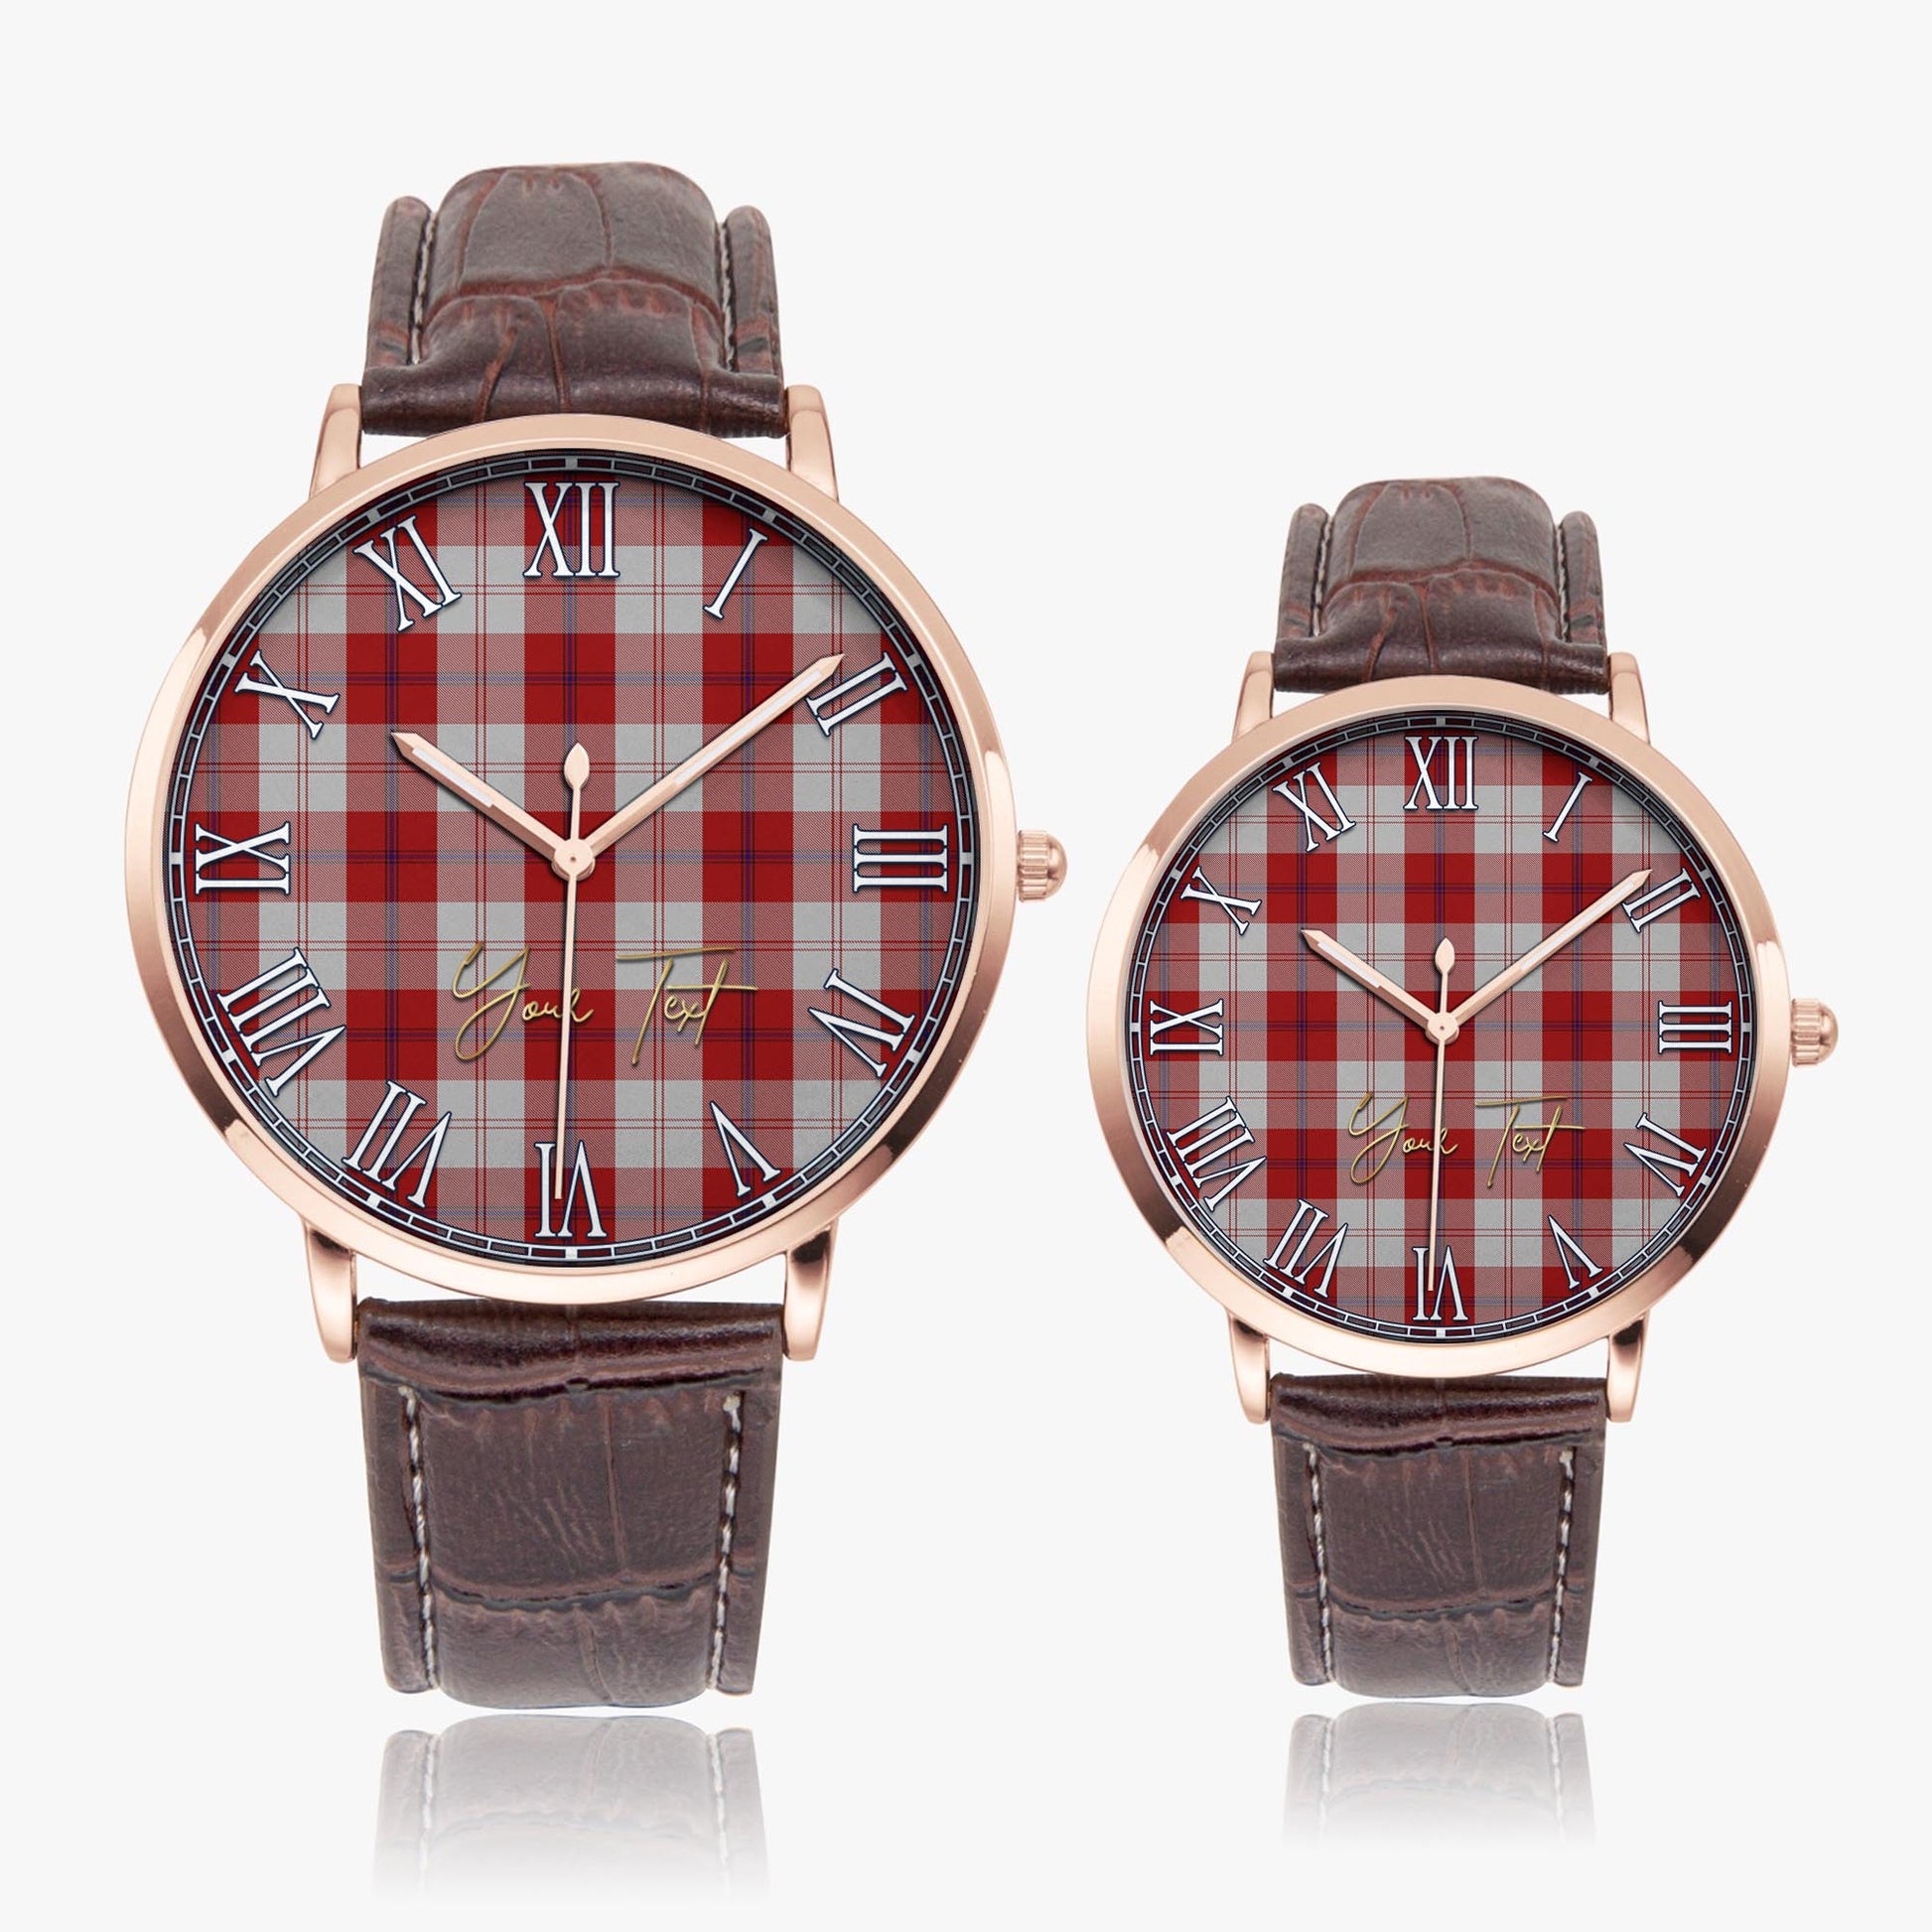 Cunningham Dress Tartan Personalized Your Text Leather Trap Quartz Watch Ultra Thin Rose Gold Case With Brown Leather Strap - Tartanvibesclothing